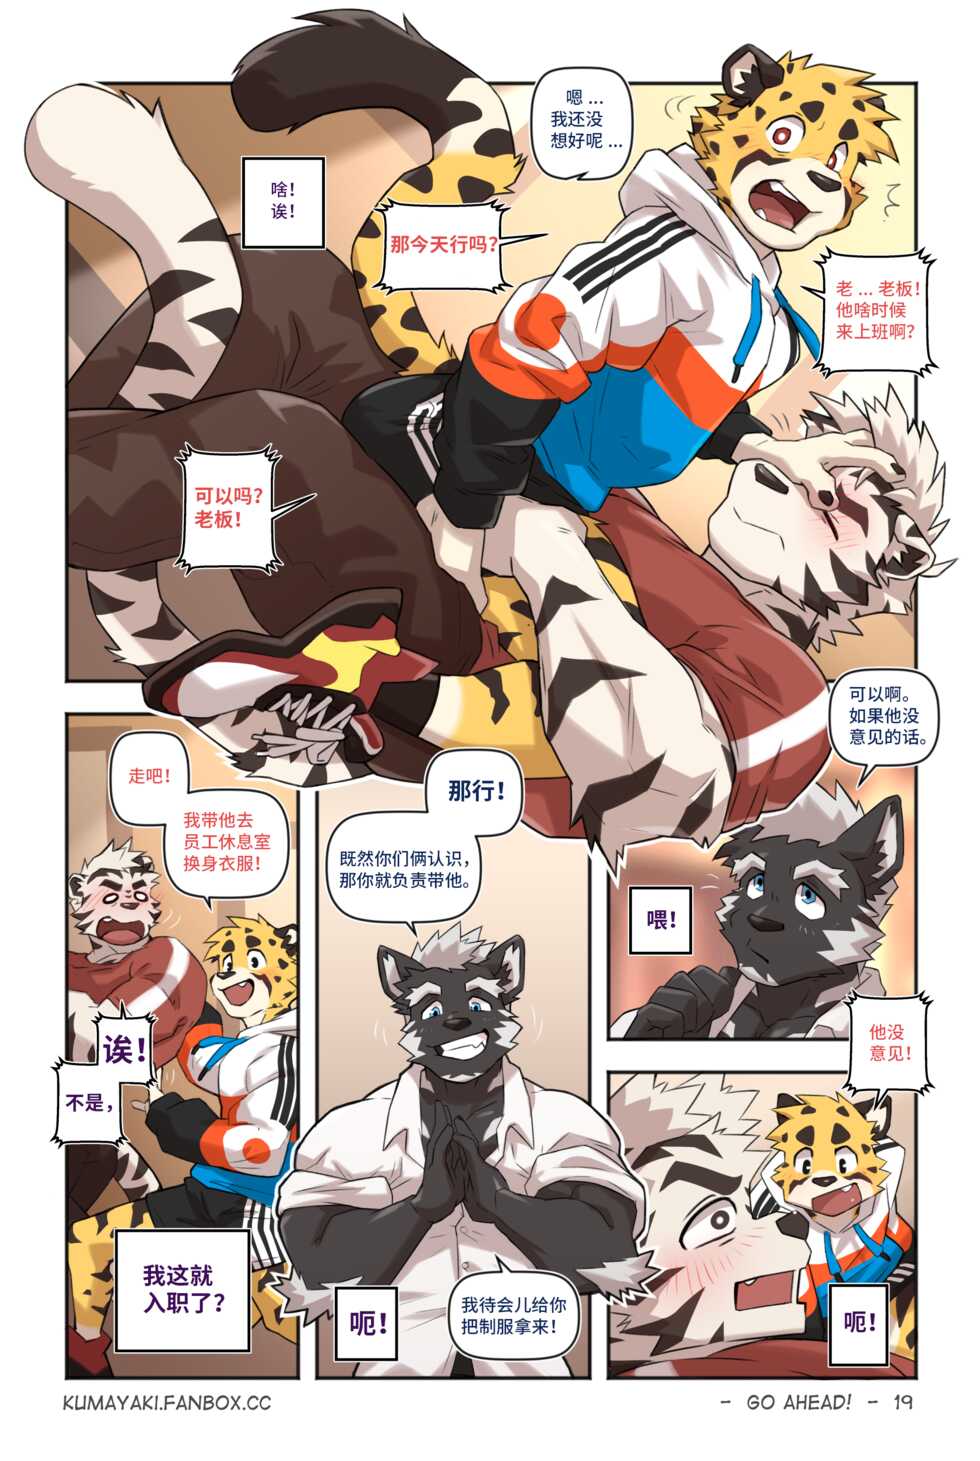 [KUMAK] Lucky Boys - Go Ahead! - (狗大汉化) [Simplified Chinese] [Ongoing] - Page 24